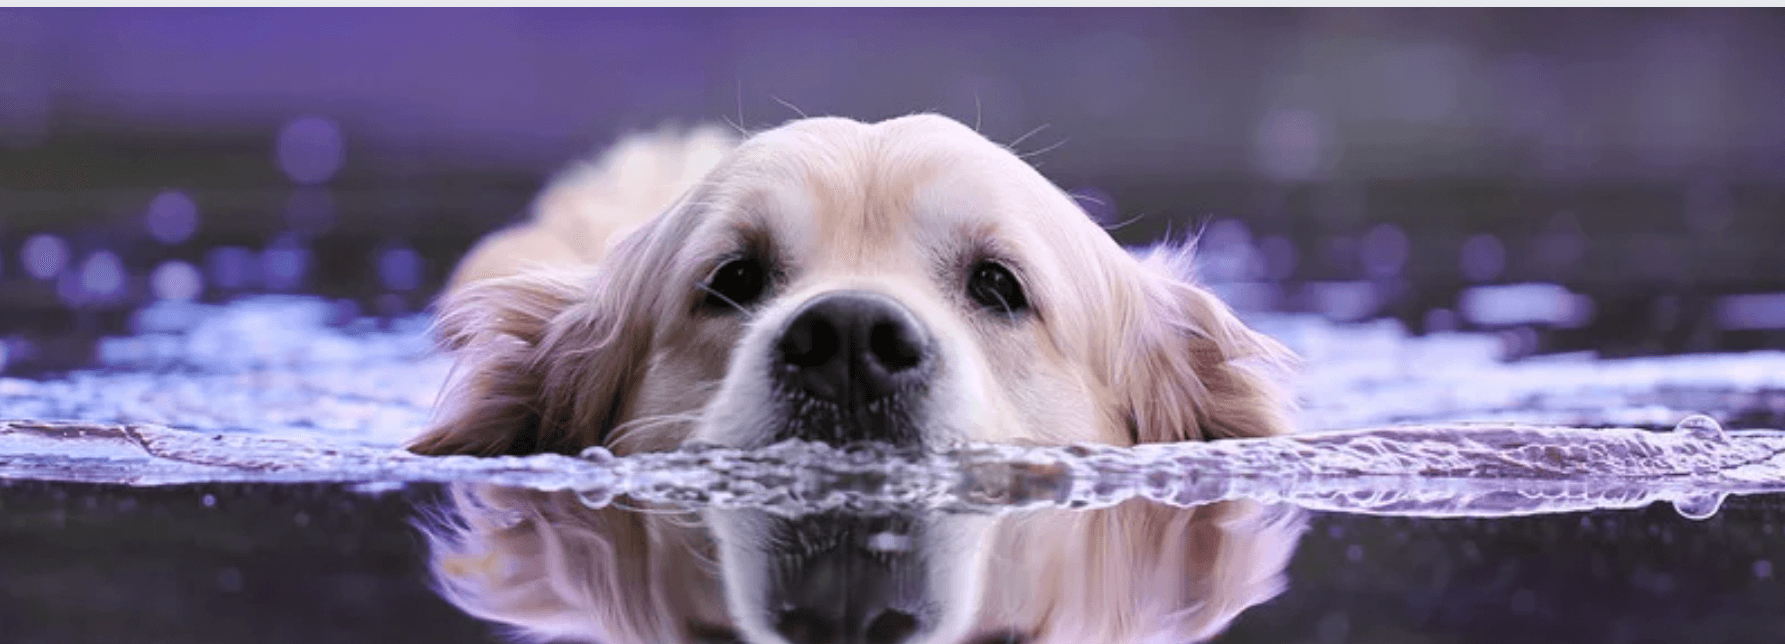 Top 5 Tips To Prevent Dehydration In Pets - Petsy